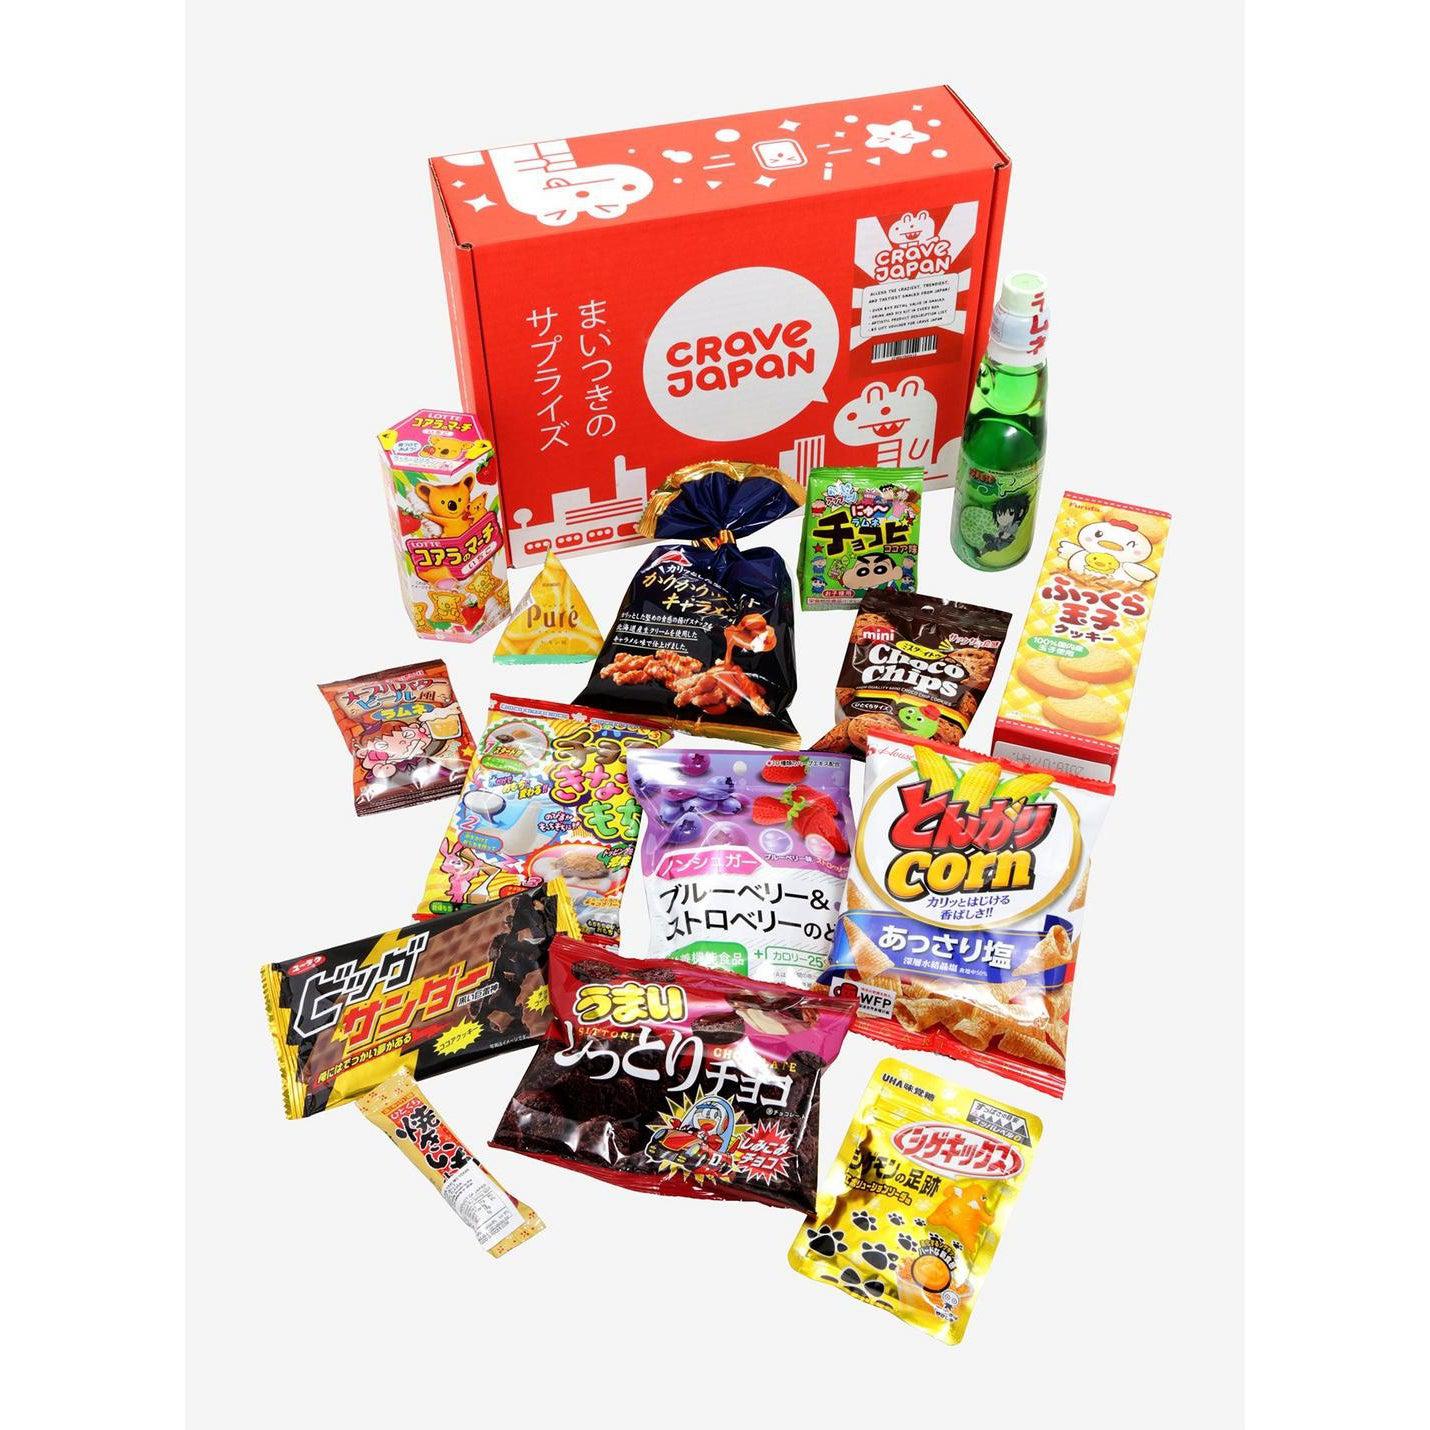 Asian Food Grocer-CRAVE JAPAN Japanese Snack Crate-90001-Legacy Toys